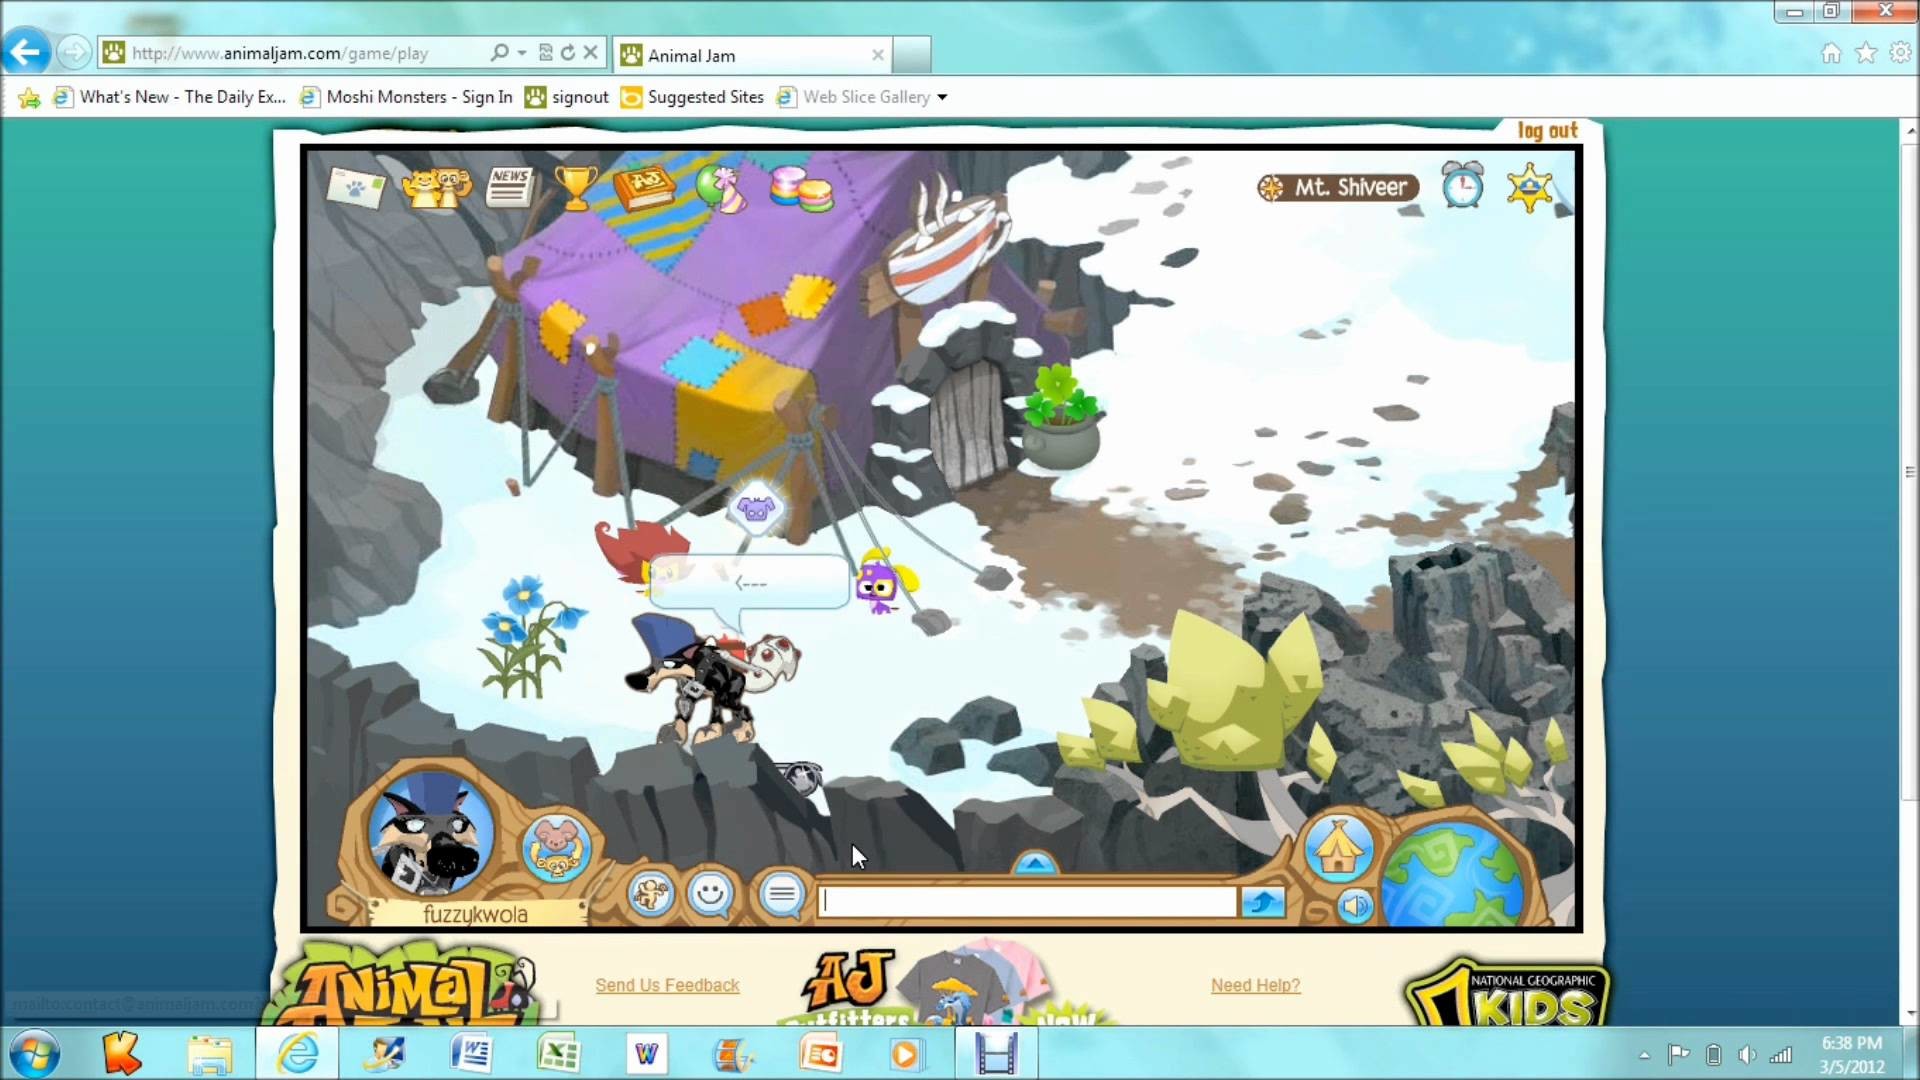 1920x1080 Where every thing is in Mt. Shiver (Animal Jam) fuzzykwola.wmv